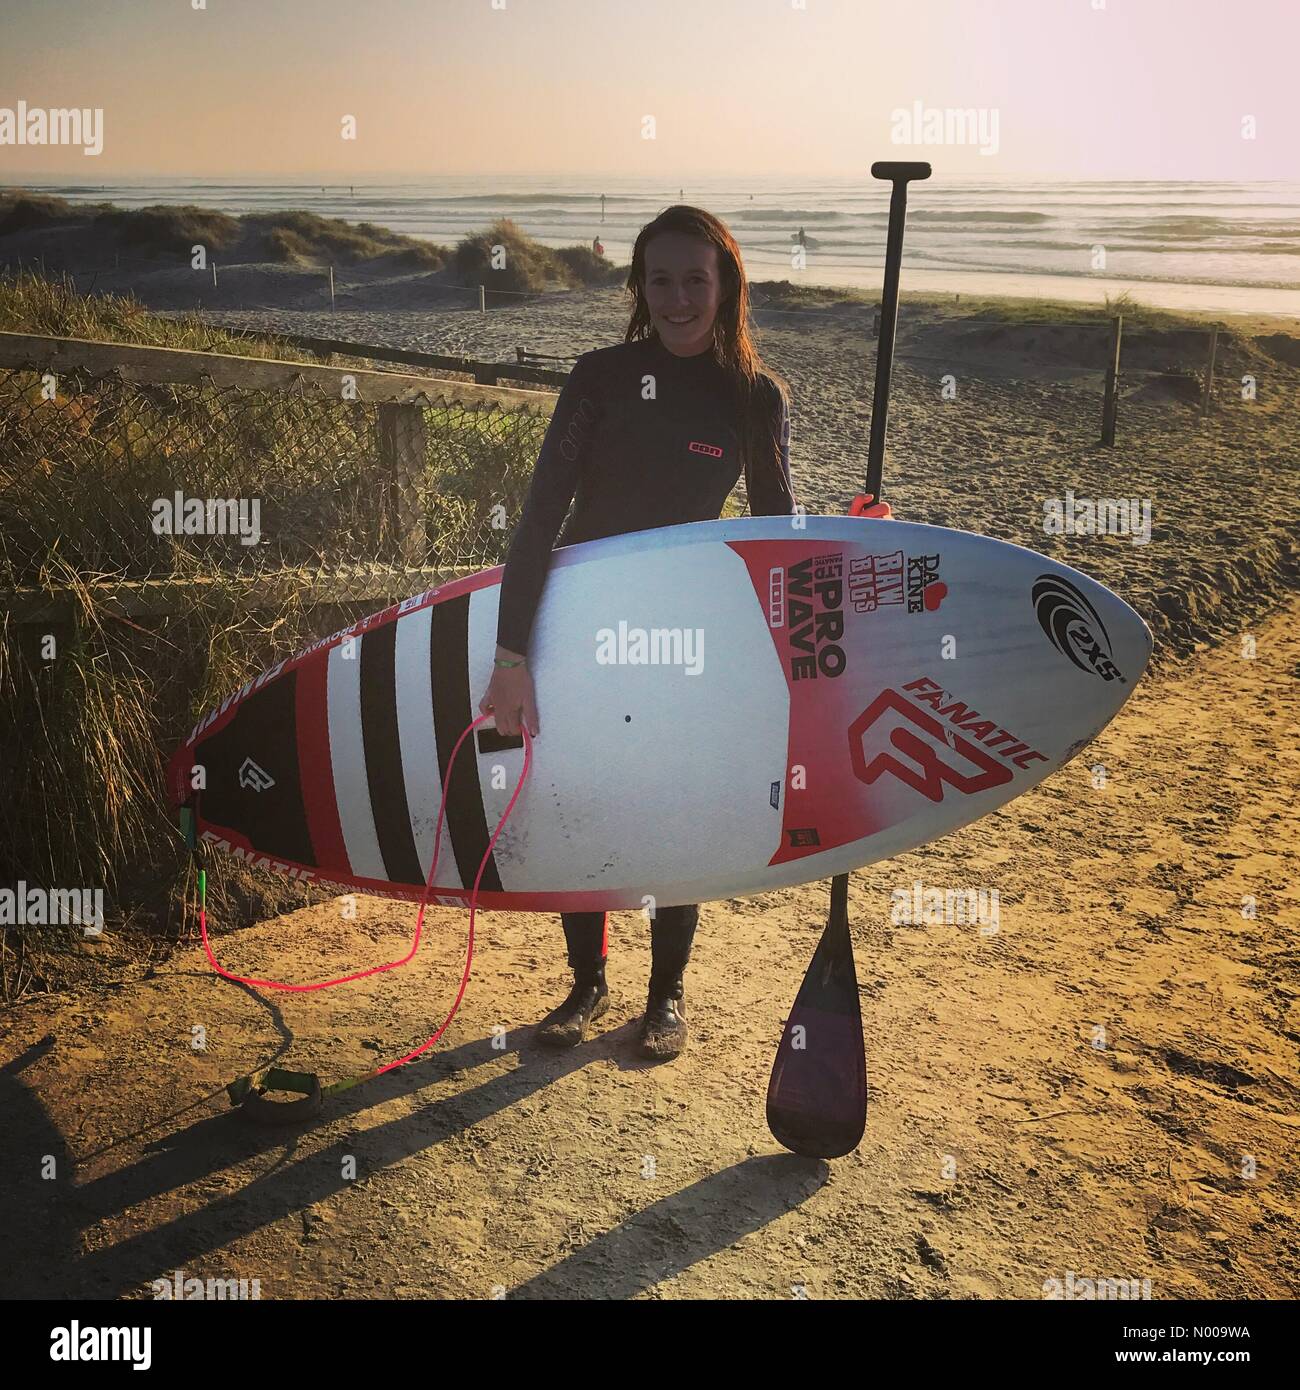 W Strand, West Wittering, Chichester, UK. 17th Dec, 2016. UK Weather: sun and waves at W. Wittering, W Sussex. UK weather Dec 17th 2016: sunshine and waves at West Wittering beach. UK paddleboarding champion Holly Bassett enjoying the conditions. © jamesjagger/StockimoNews/Alamy Live News Stock Photo